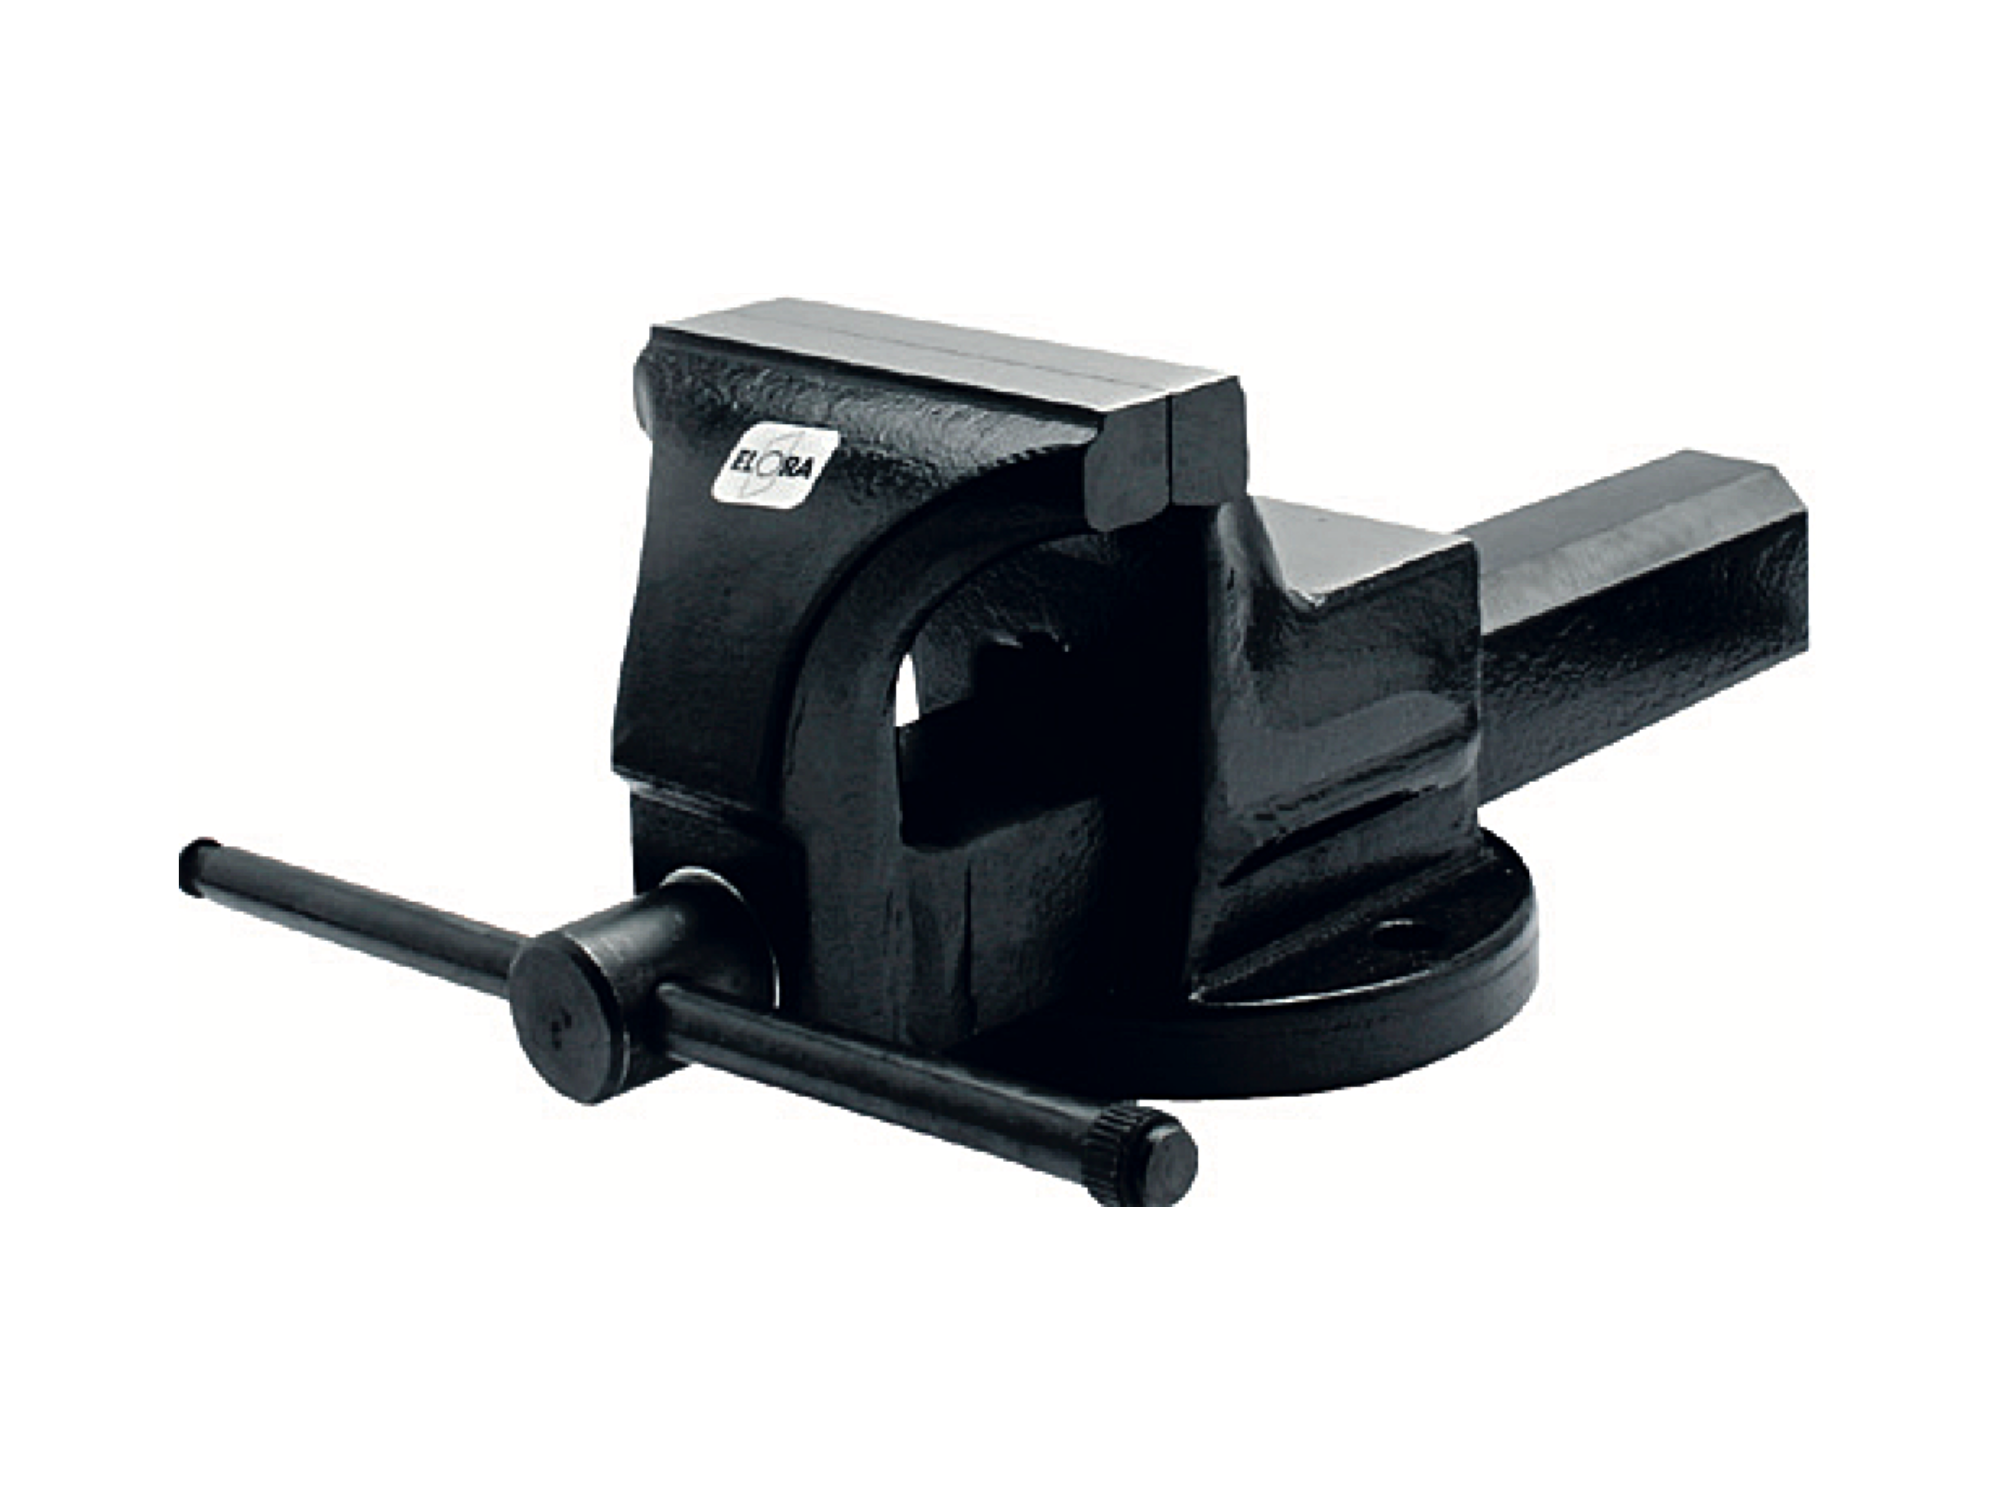 ELORA 1495 Parallel Bench Vice (ELORA Tools) - Premium Parallel Bench from ELORA - Shop now at Yew Aik.